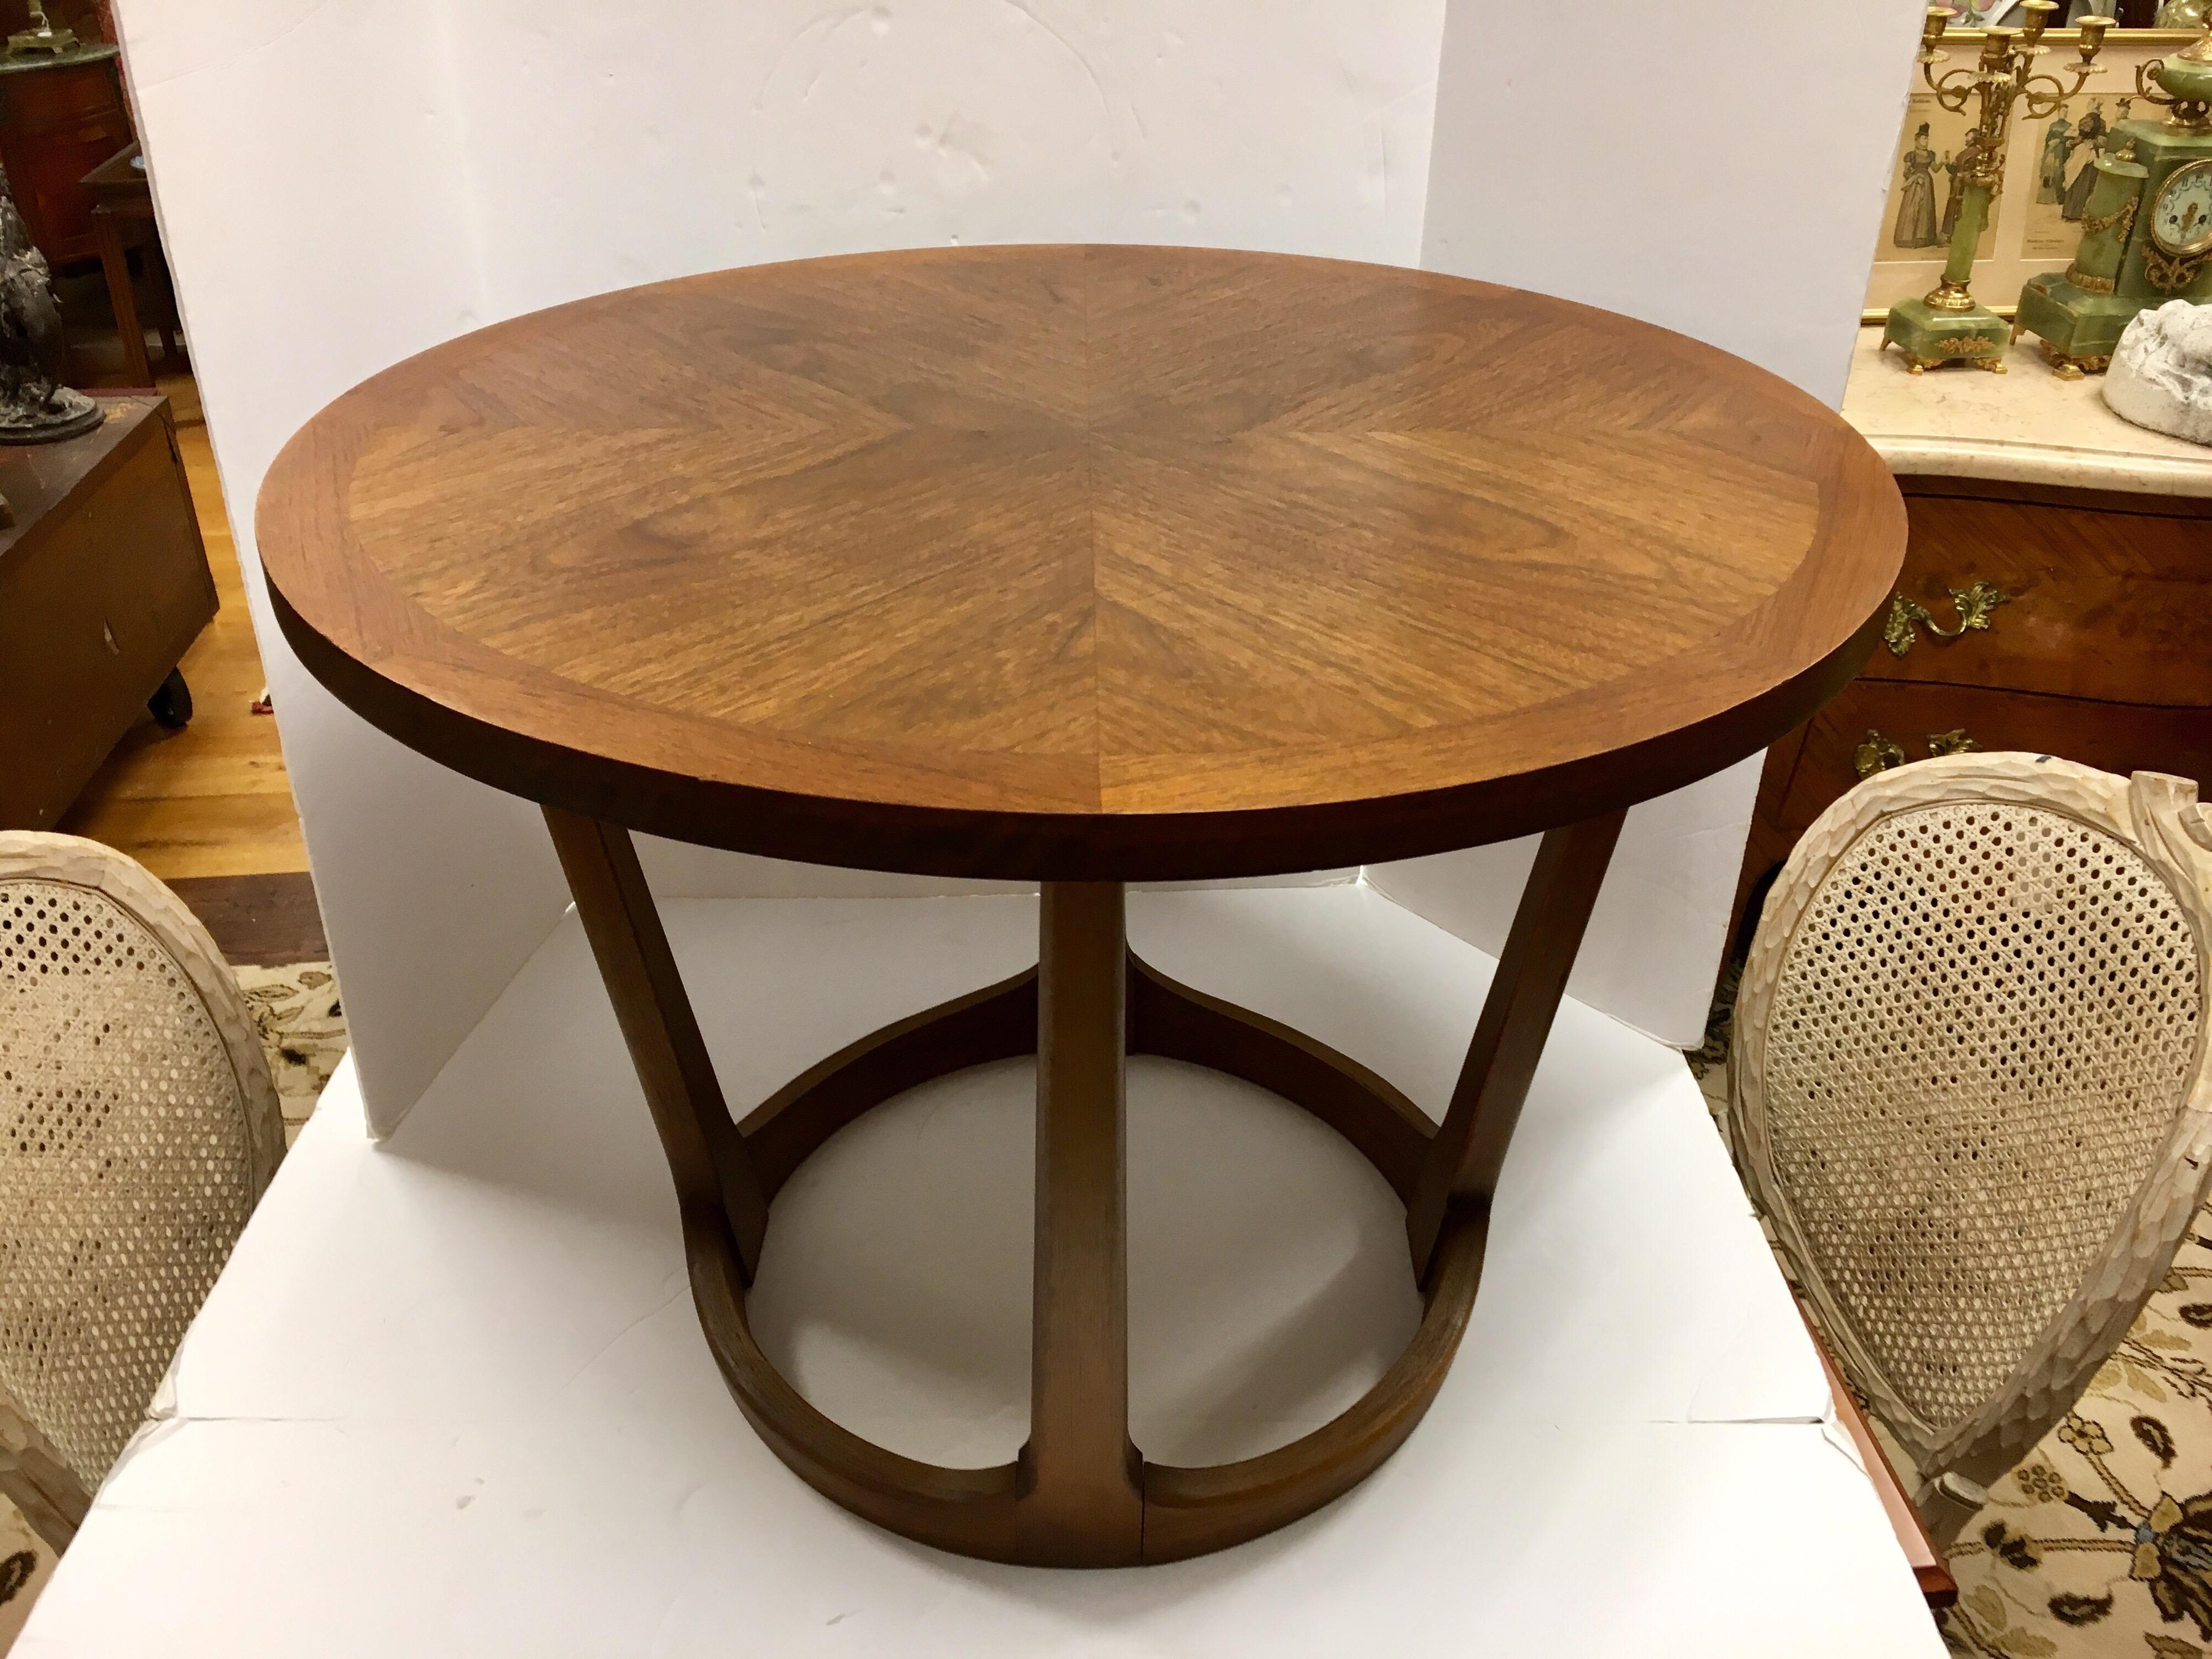 Gorgeous and rare round Lane Altavista table whose size makes it appropriate for use as a coffee table, end or side table.